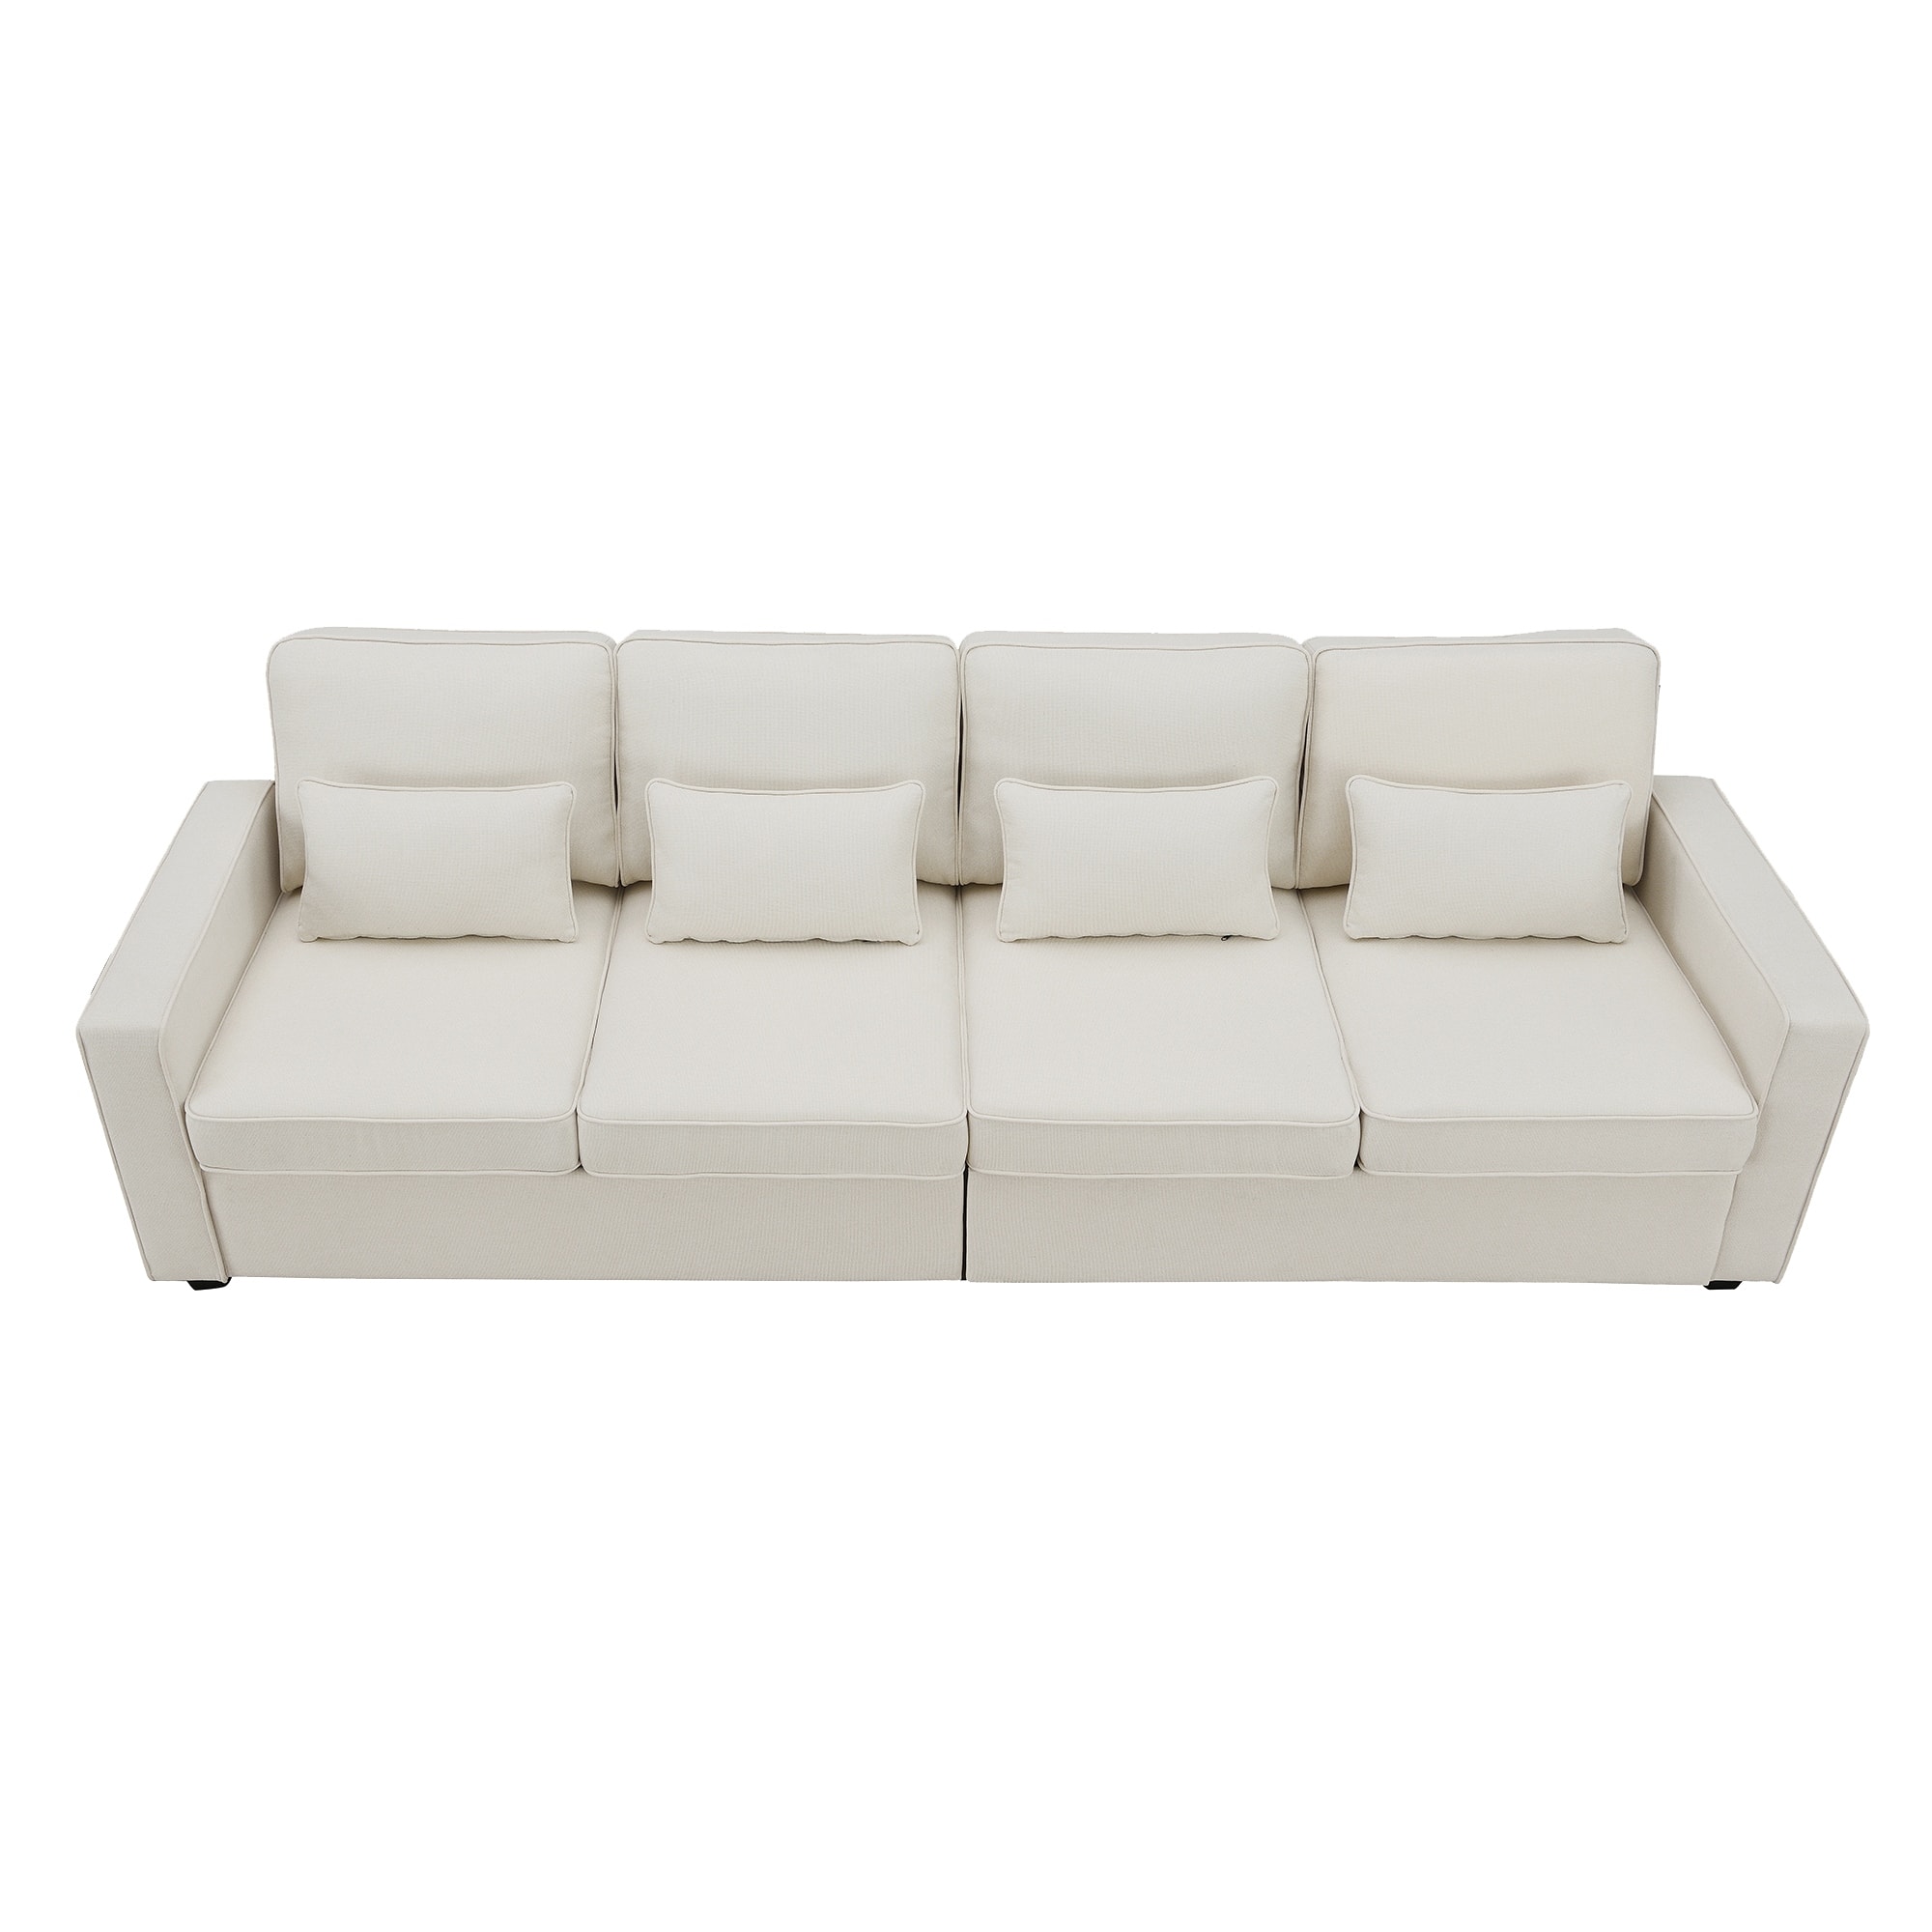 4-Seater Modern Linen Fabric Sofa with Armrest Pockets and 4 Pillows ...